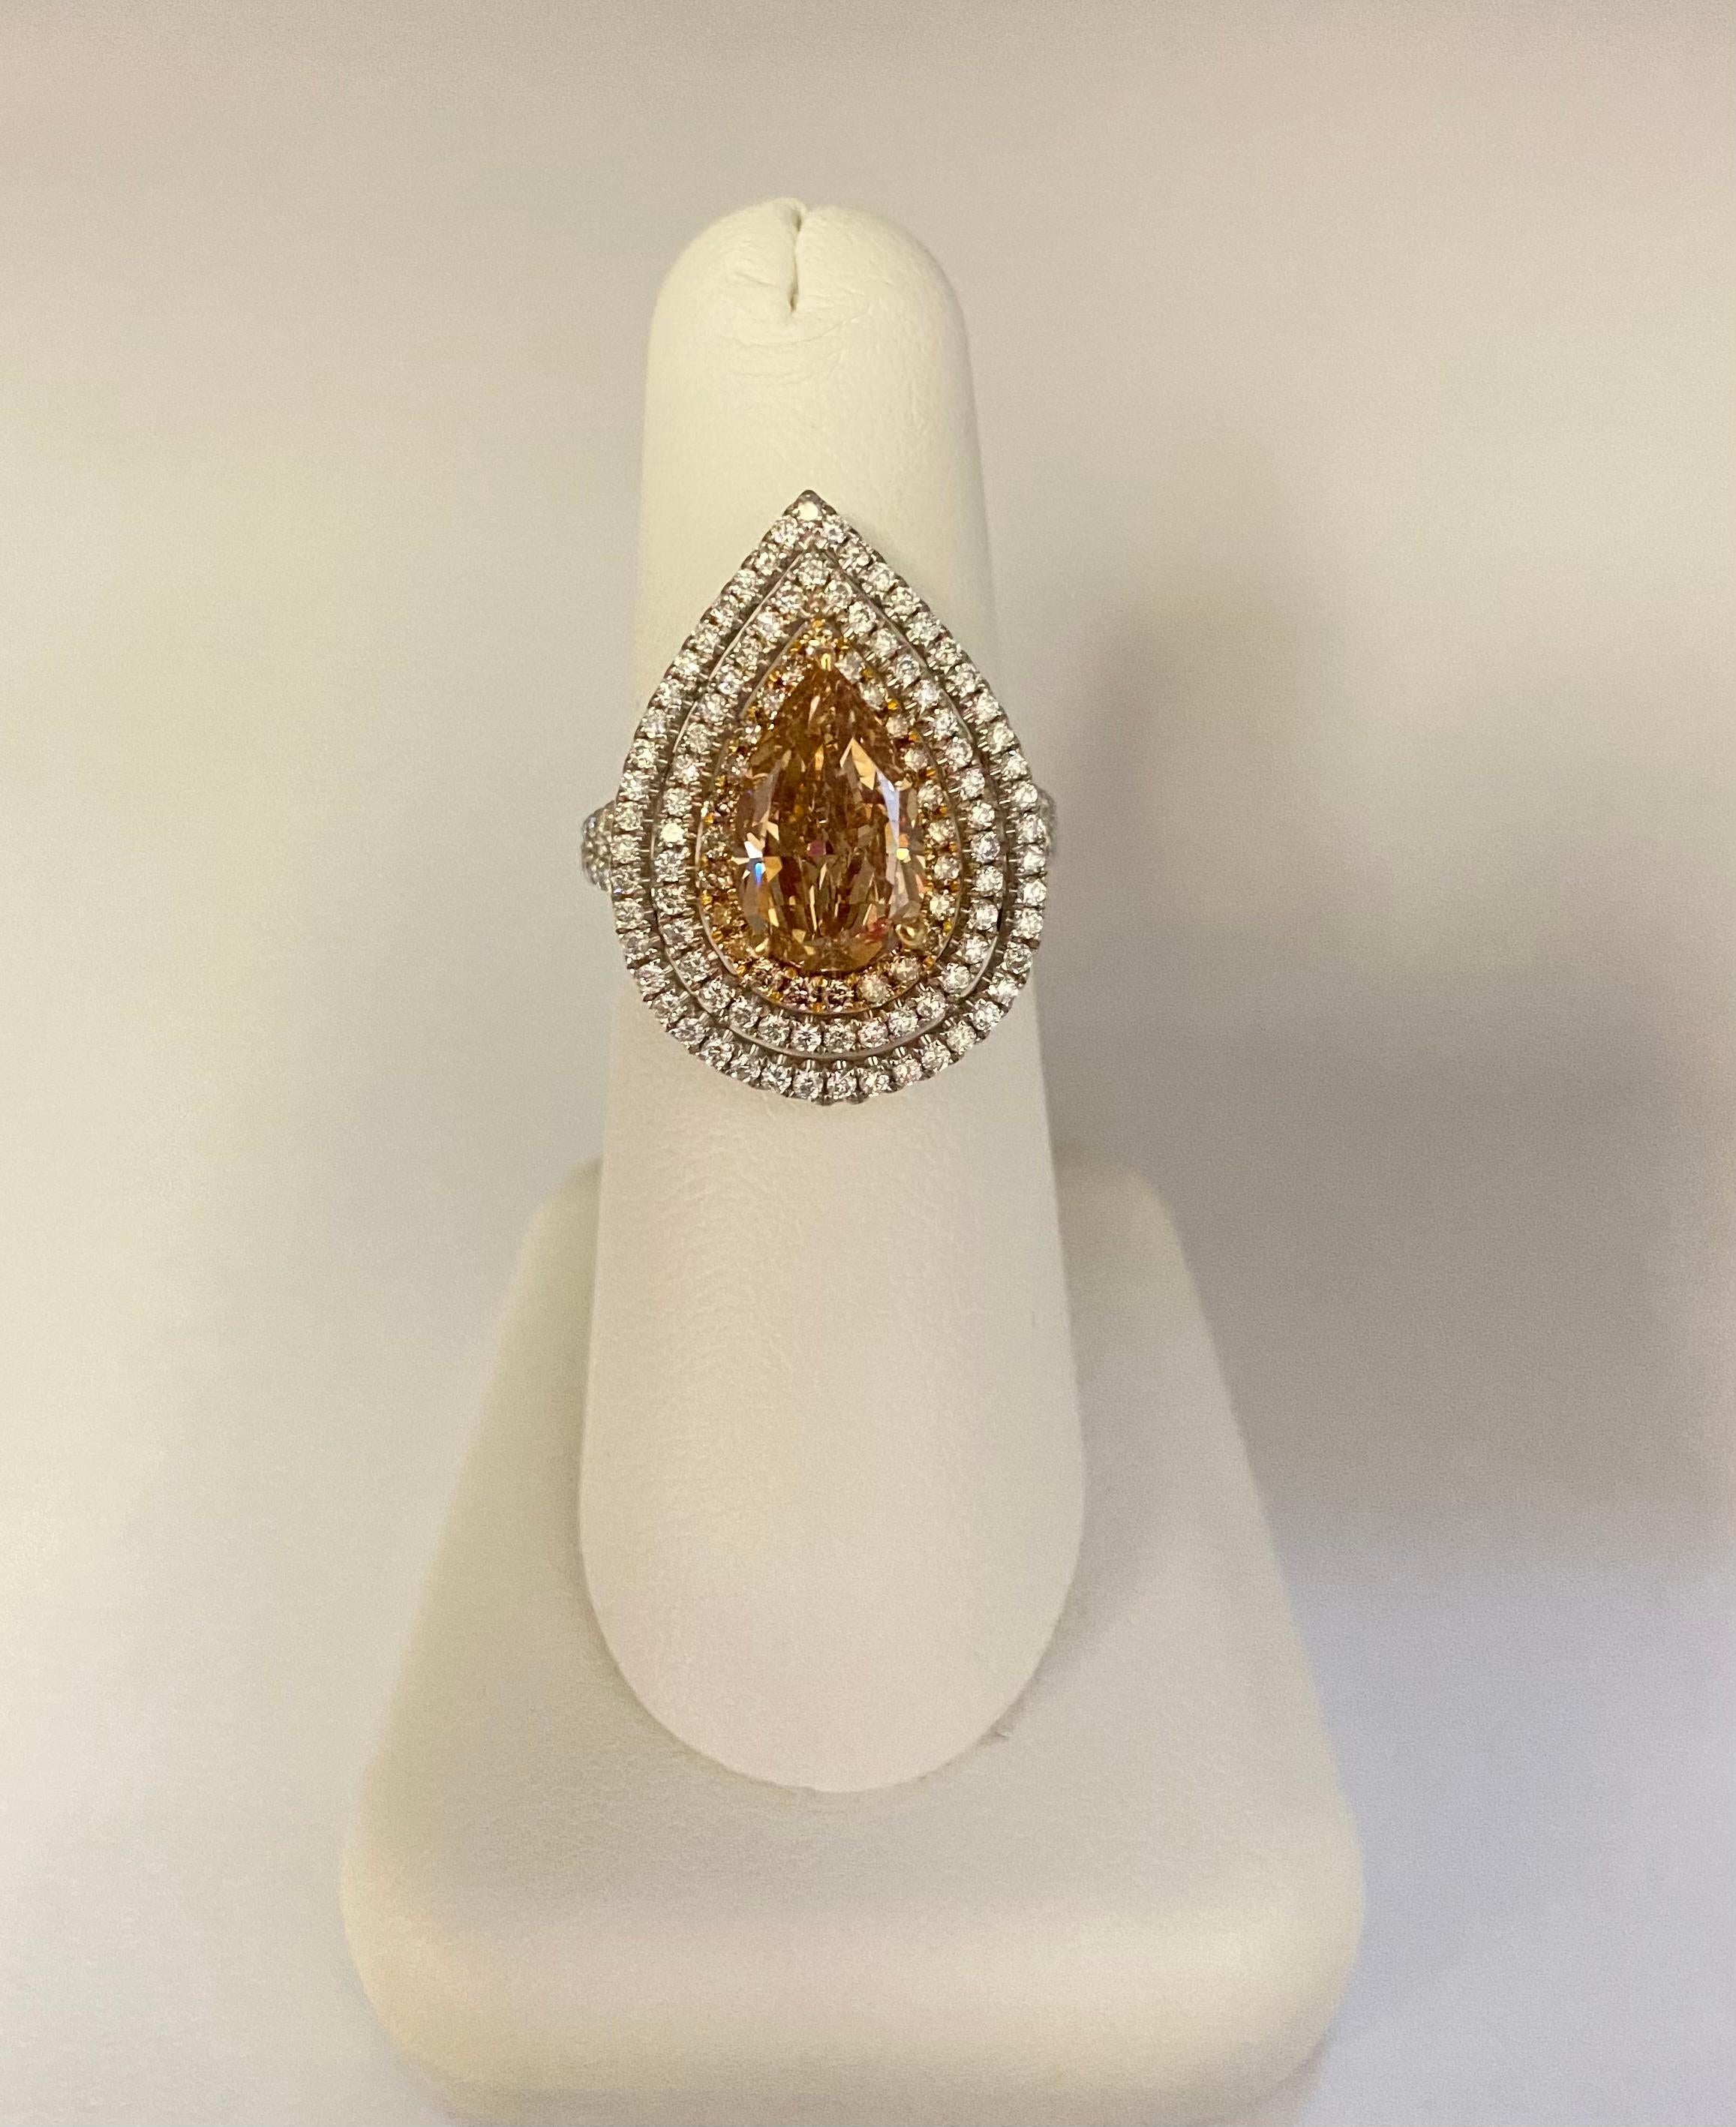 Handmade 18k White & Rose gold micro-pave ring with GIA certified rare pear shape cut diamond of Fancy Brown-Orange diamond color & SI2 clarity, size 7.  
The ring is made of 2 rows of natural round brilliant cut white diamonds and 1 row of natural